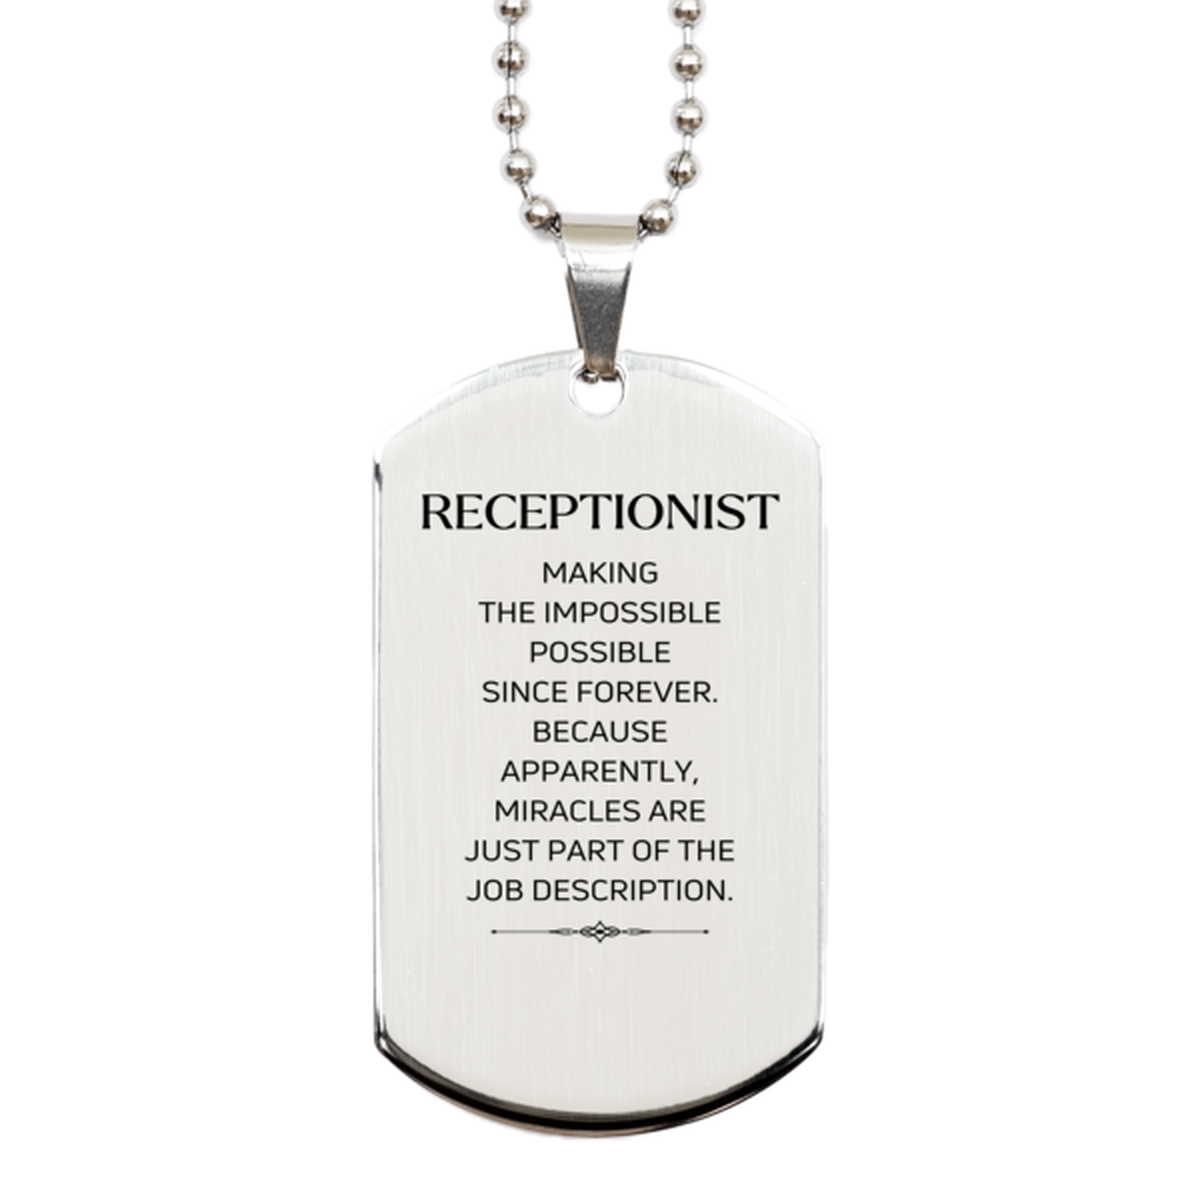 Funny Receptionist Gifts, Miracles are just part of the job description, Inspirational Birthday Silver Dog Tag For Receptionist, Men, Women, Coworkers, Friends, Boss